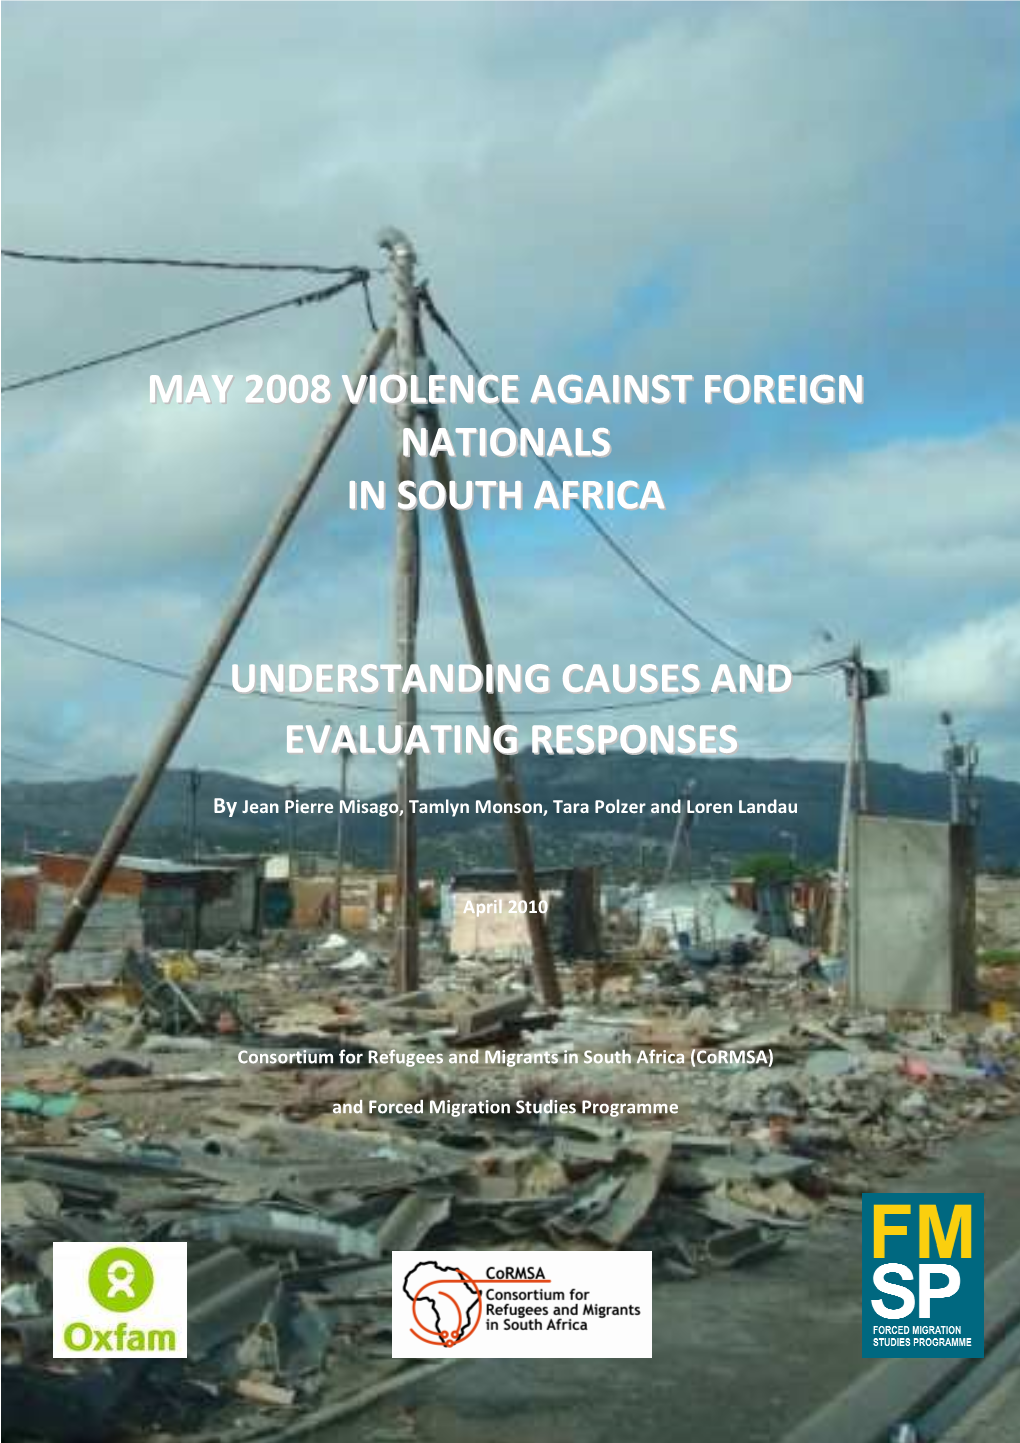 May 2008 Violence Against Foreign Nationals in South Africa